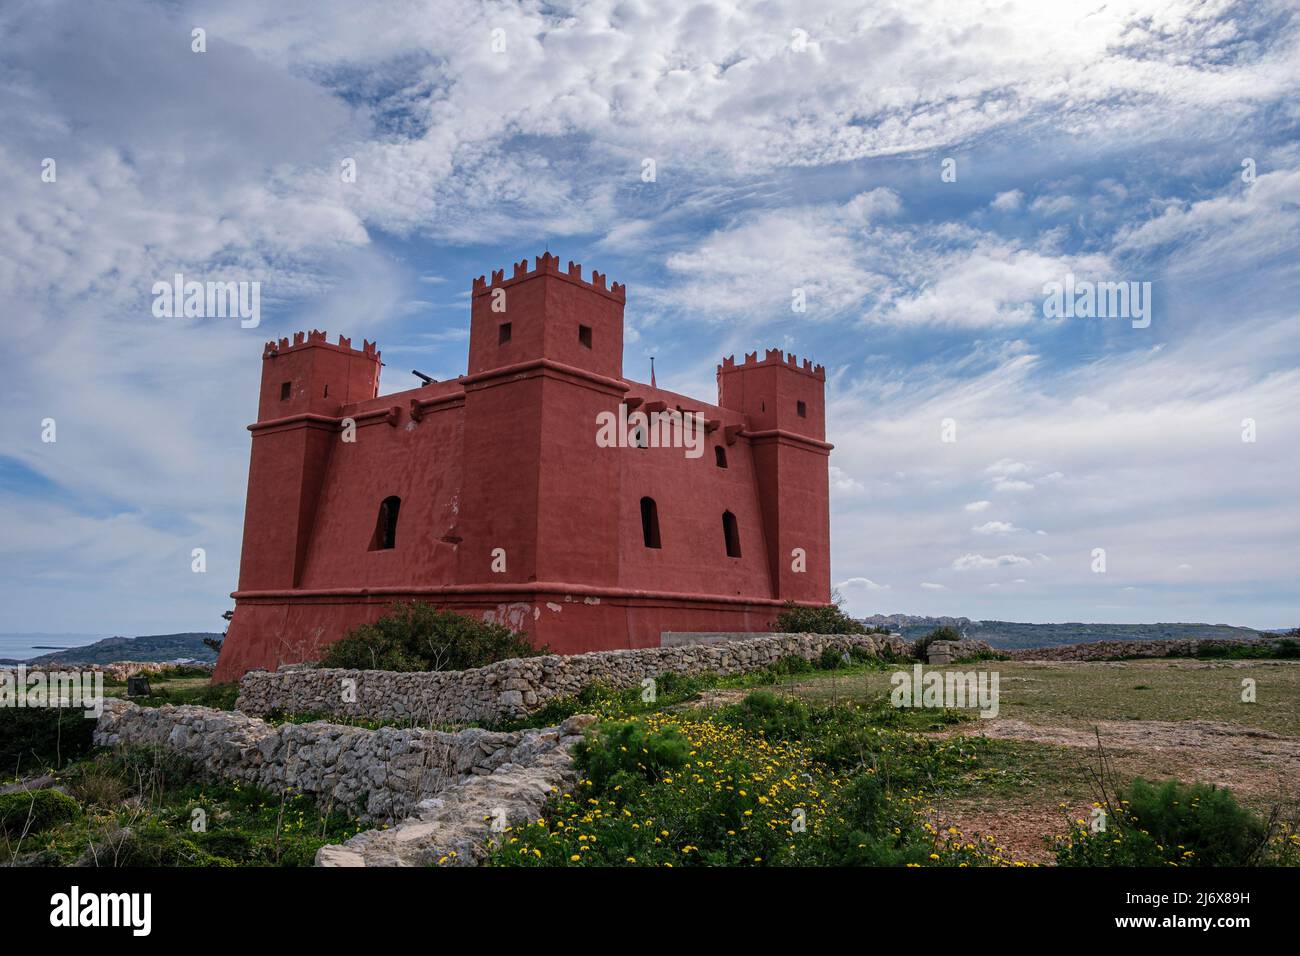 arve tildele sygdom The Red Tower (St Agatha's Tower), Mellieha, Malta Stock Photo - Alamy